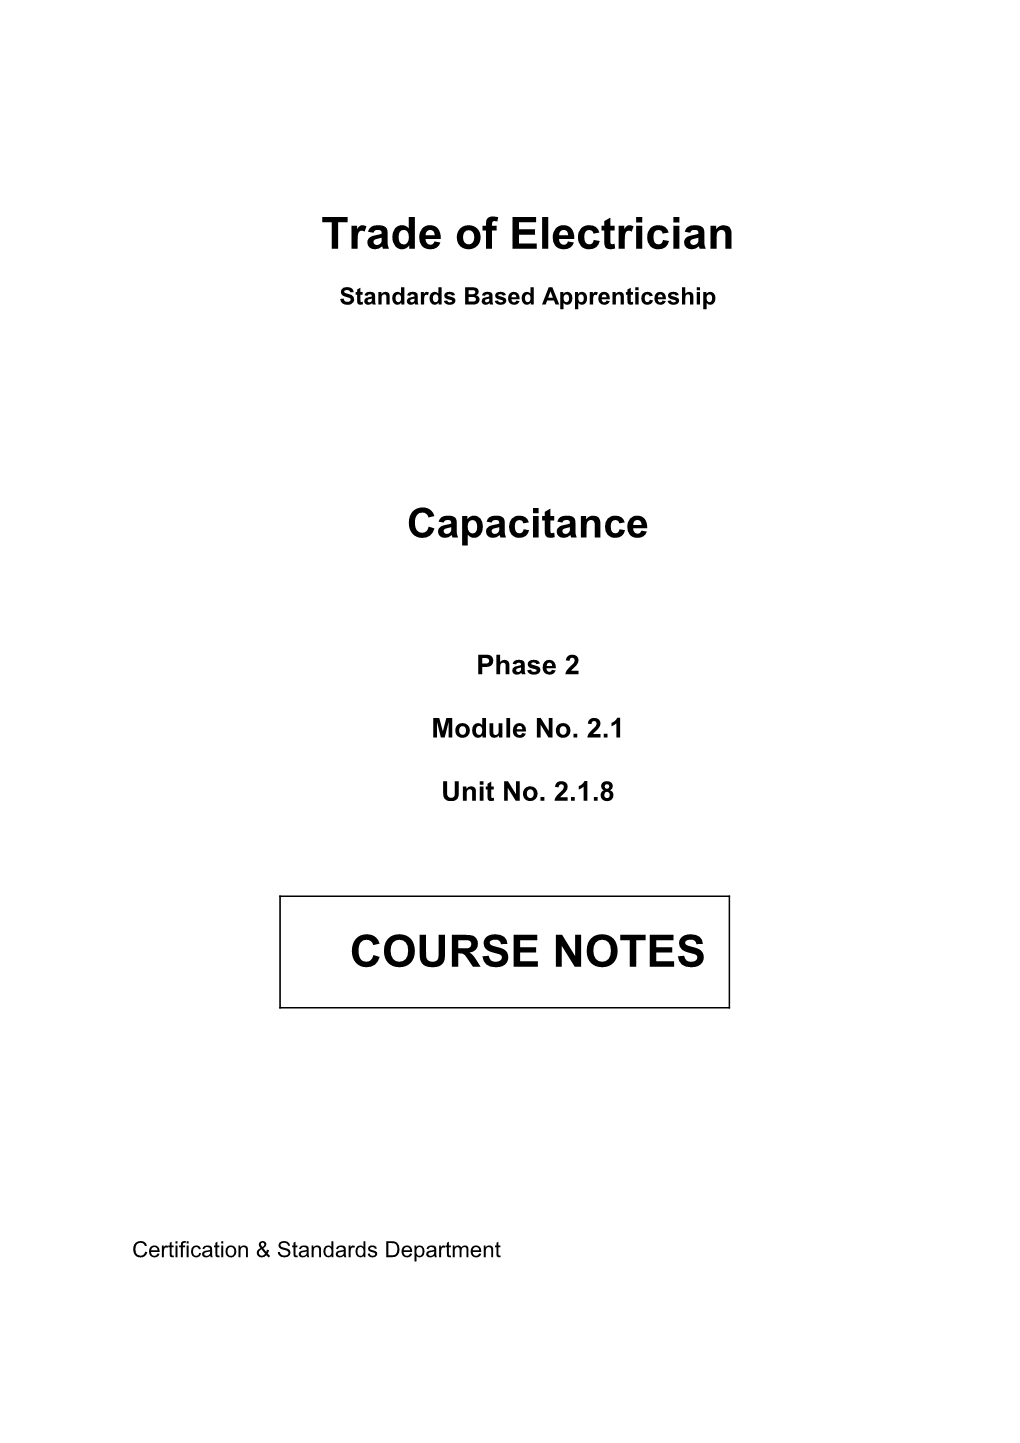 SOLAS Certification and Standards Electrical Course Notes - Unit 2.1.8